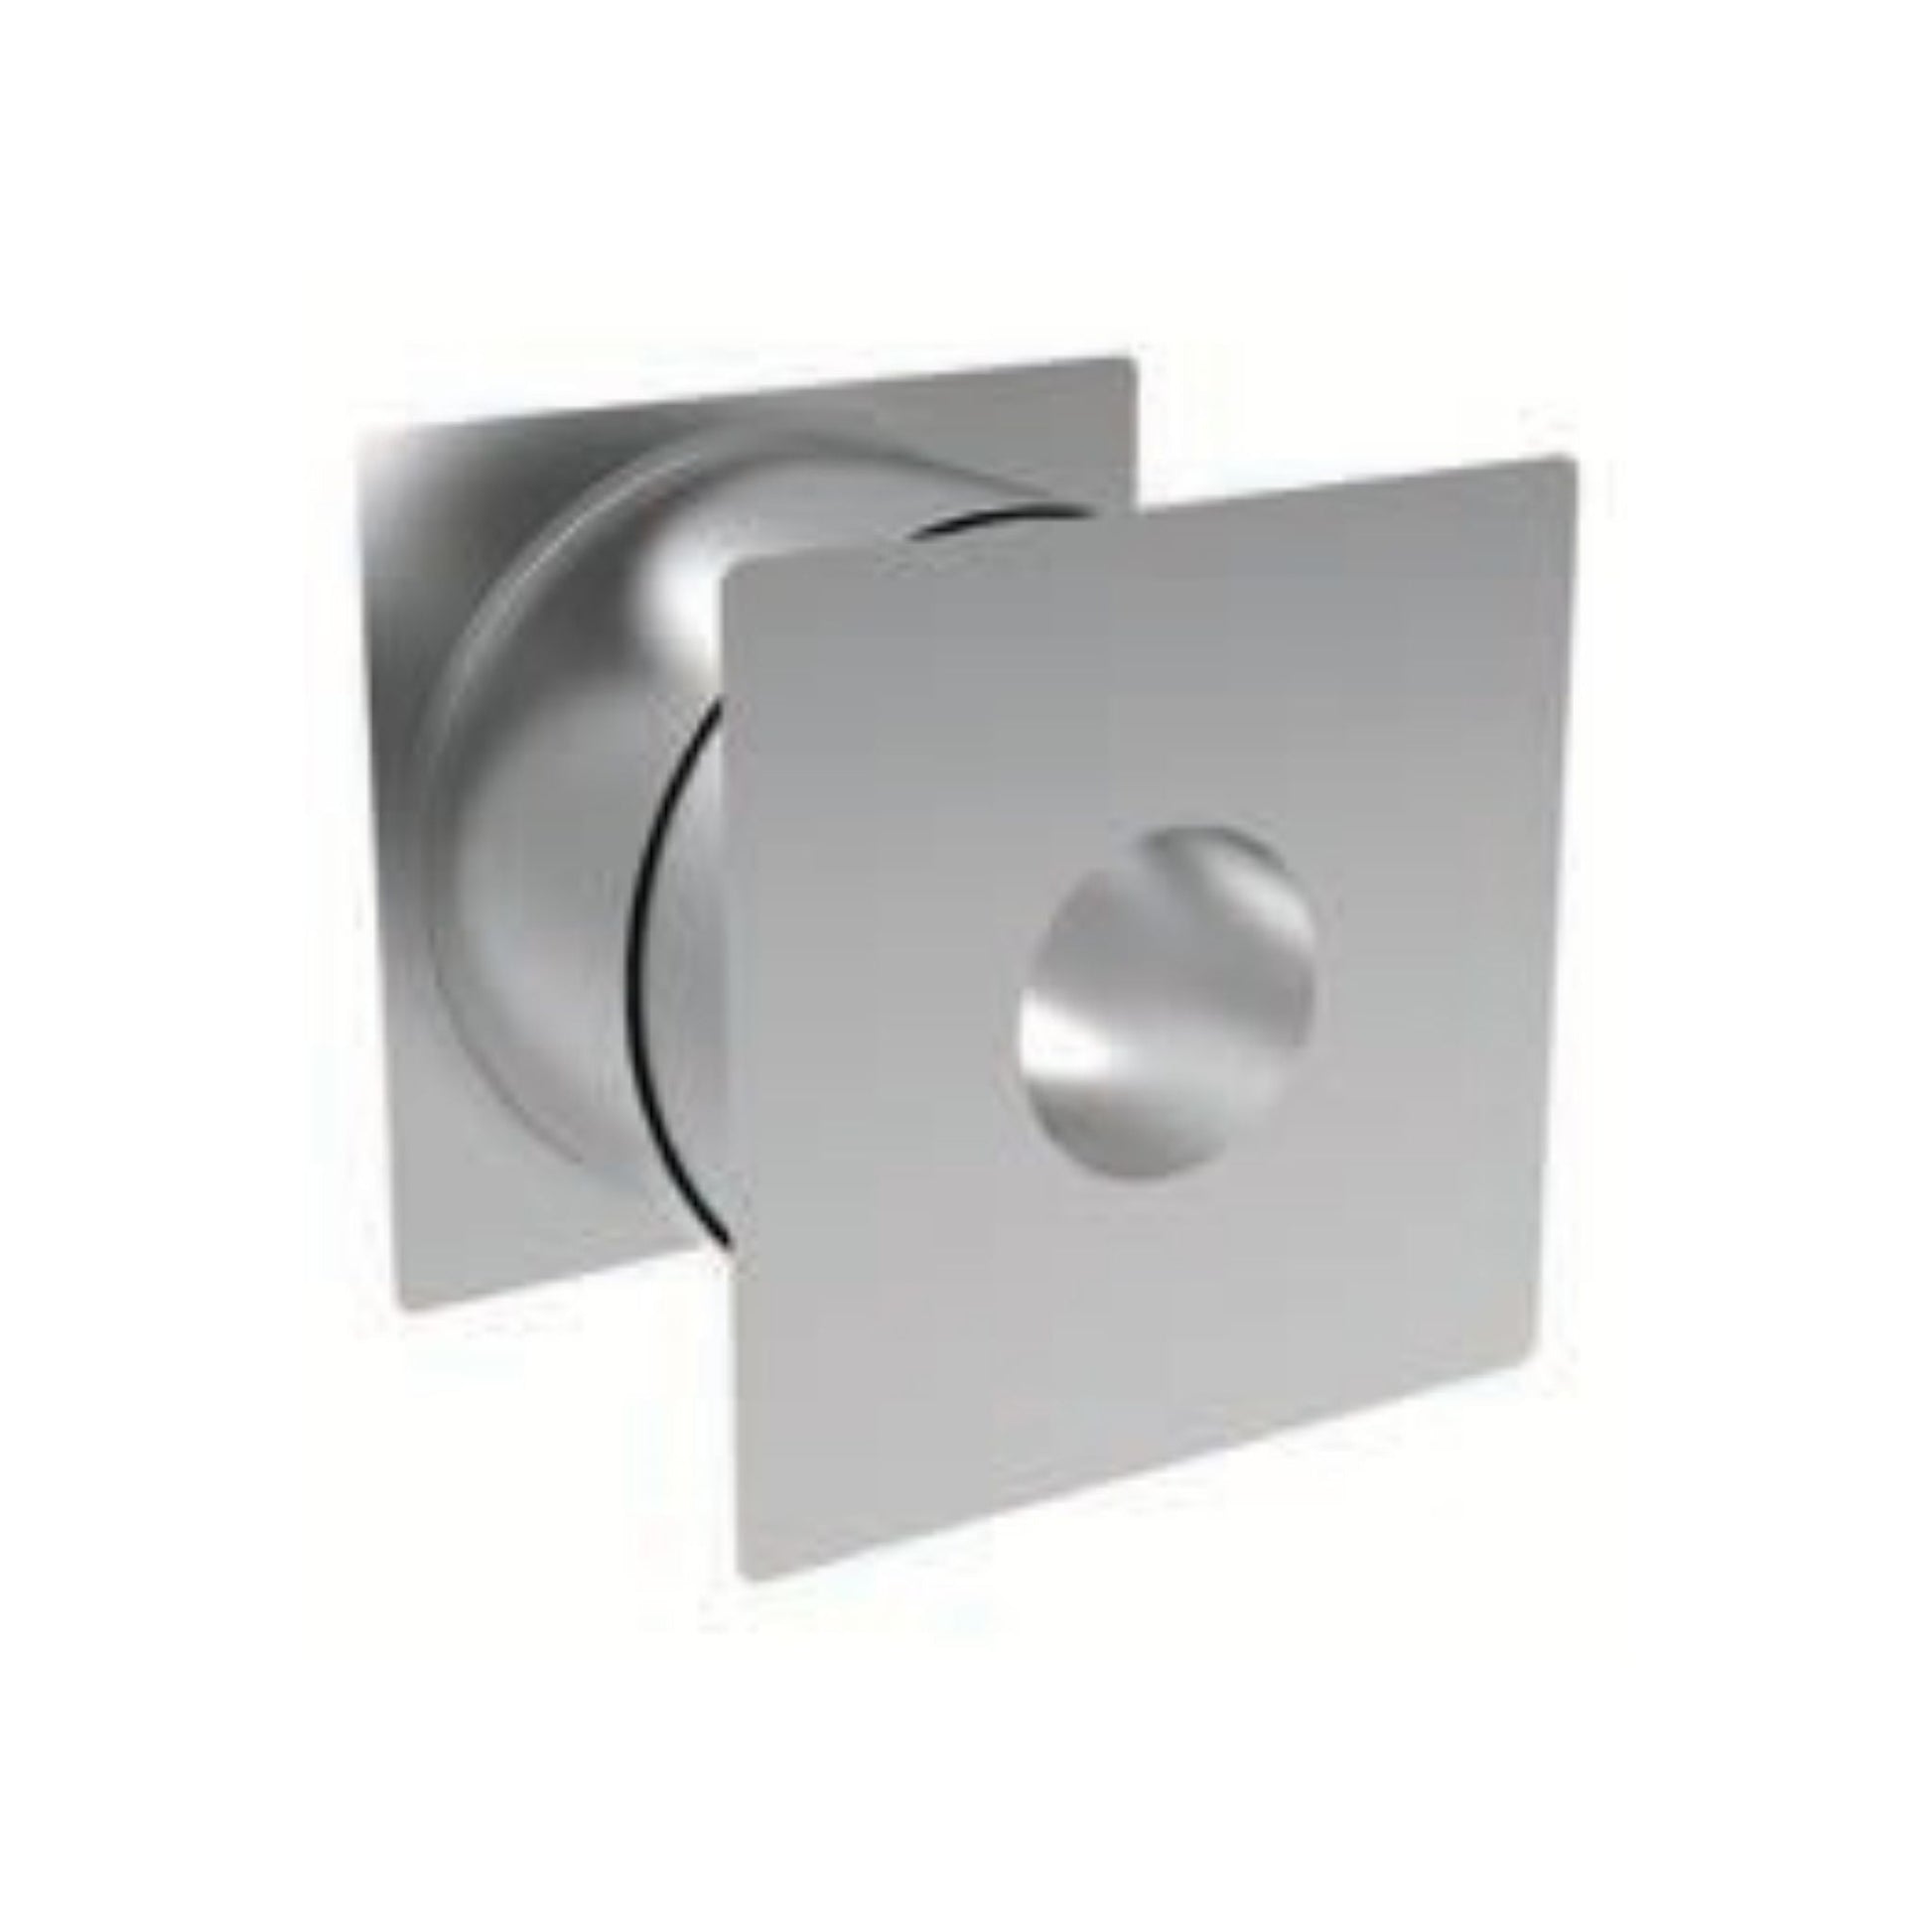 DuraVent FasNSeal 6" 29-4C Stainless Steel Insulated Wall Pass Through